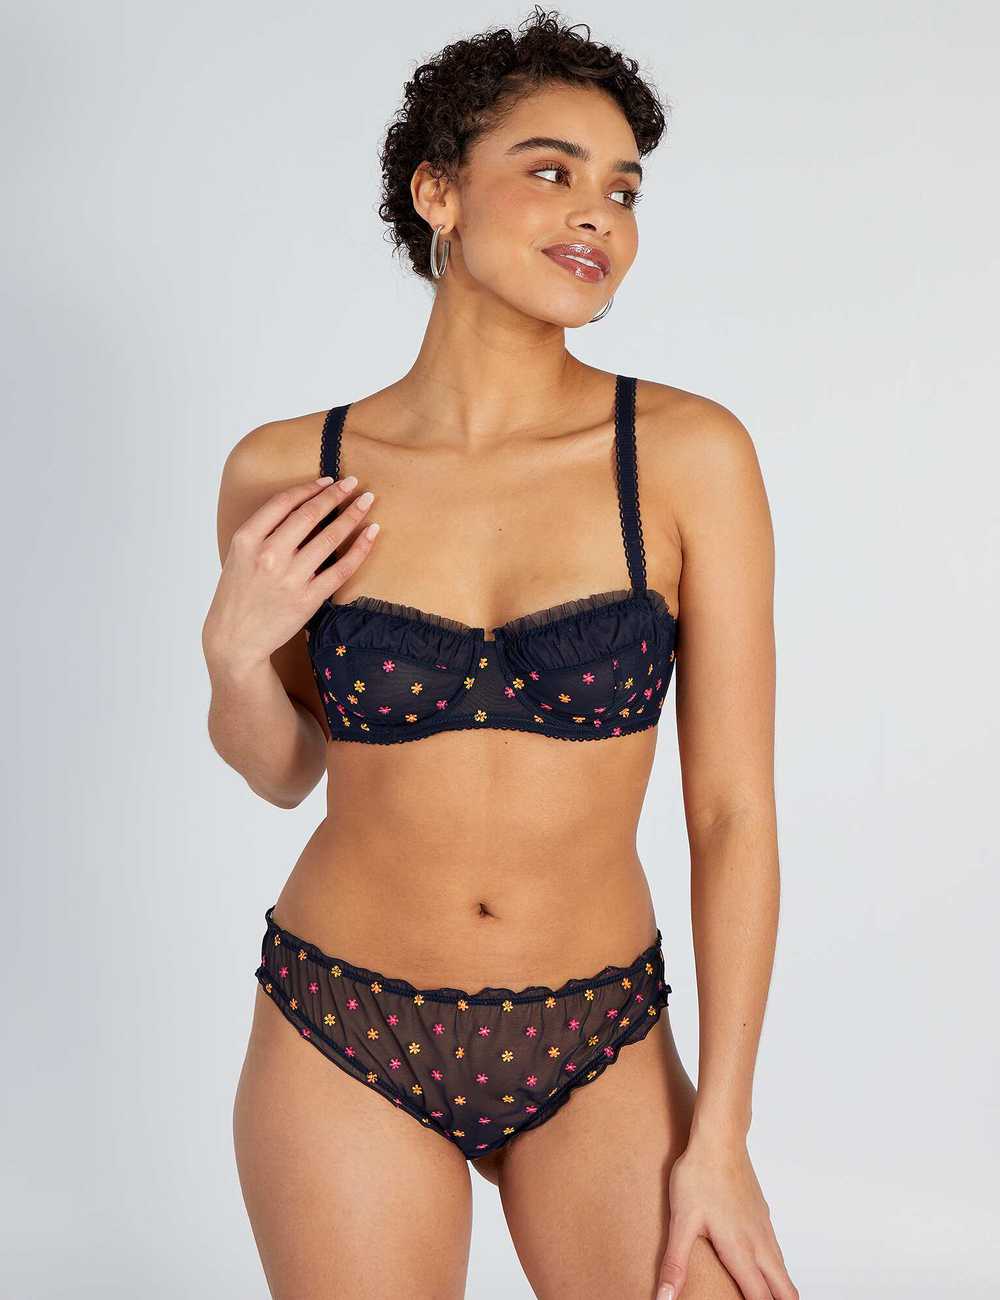 Floral-embroidered tulle demi-cup bra